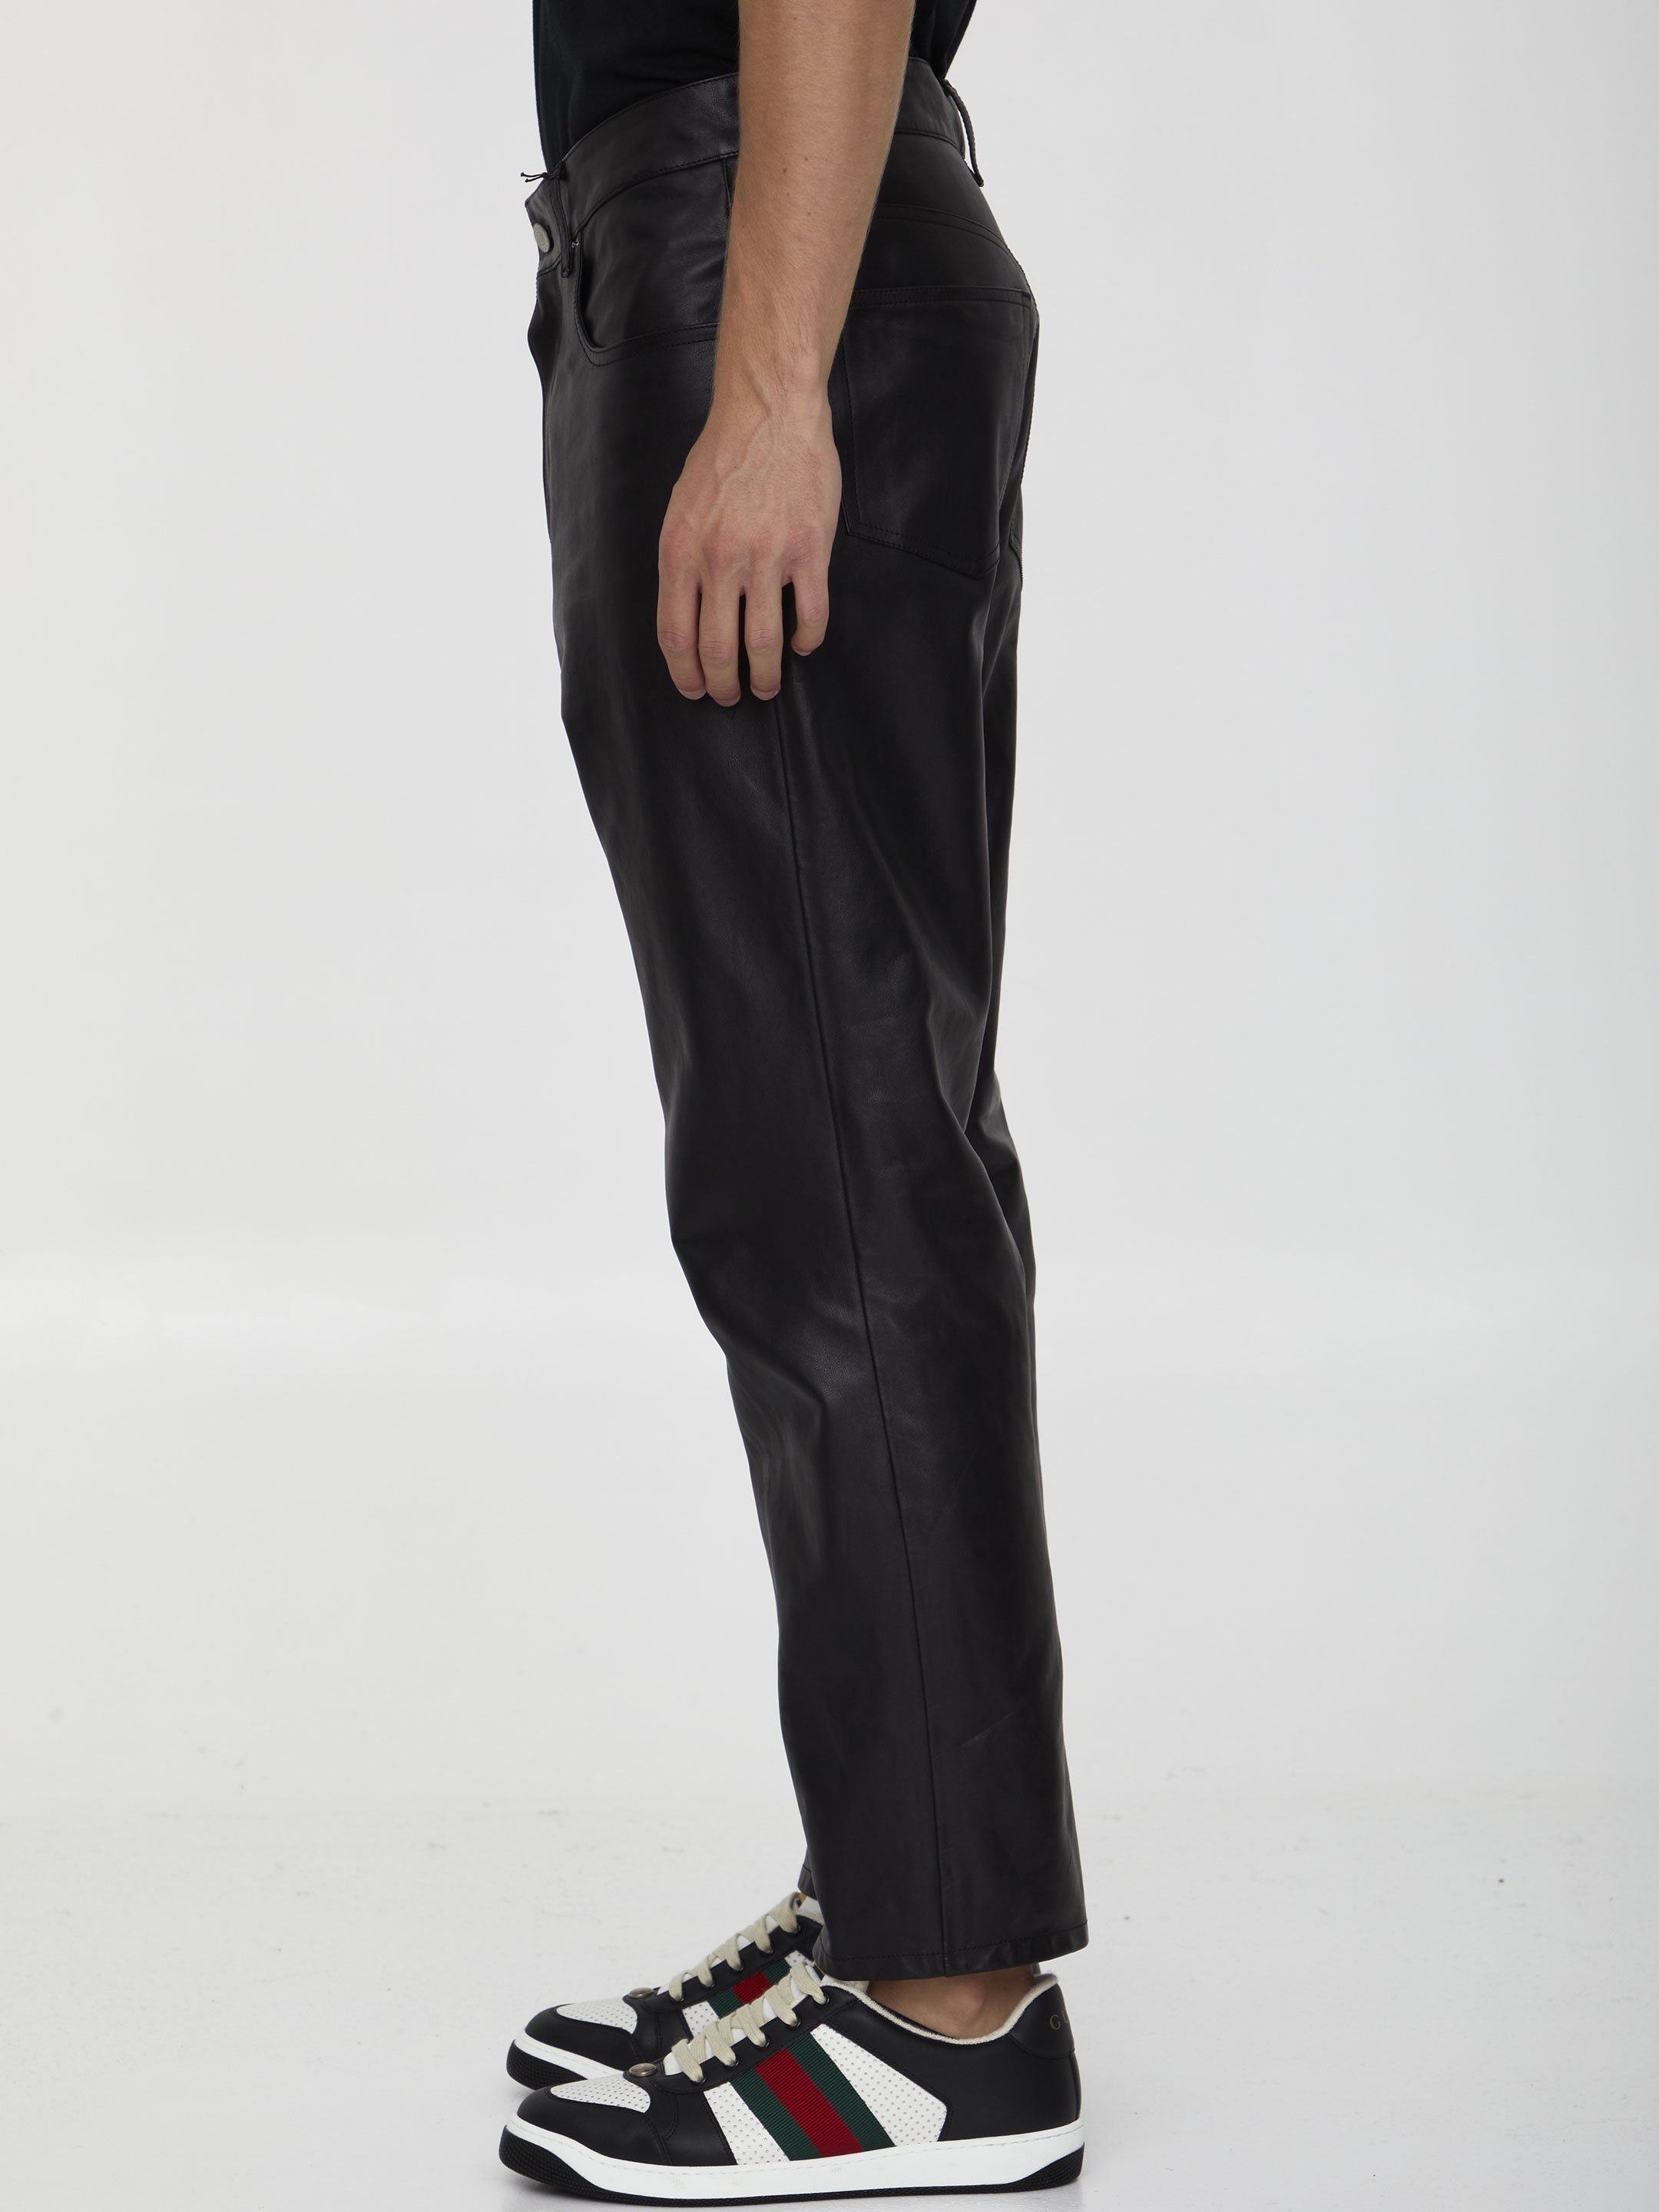 GUCCI-OUTLET-SALE-Shiny-leather-trousers-Hosen-48-BLACK-ARCHIVE-COLLECTION-3.jpg